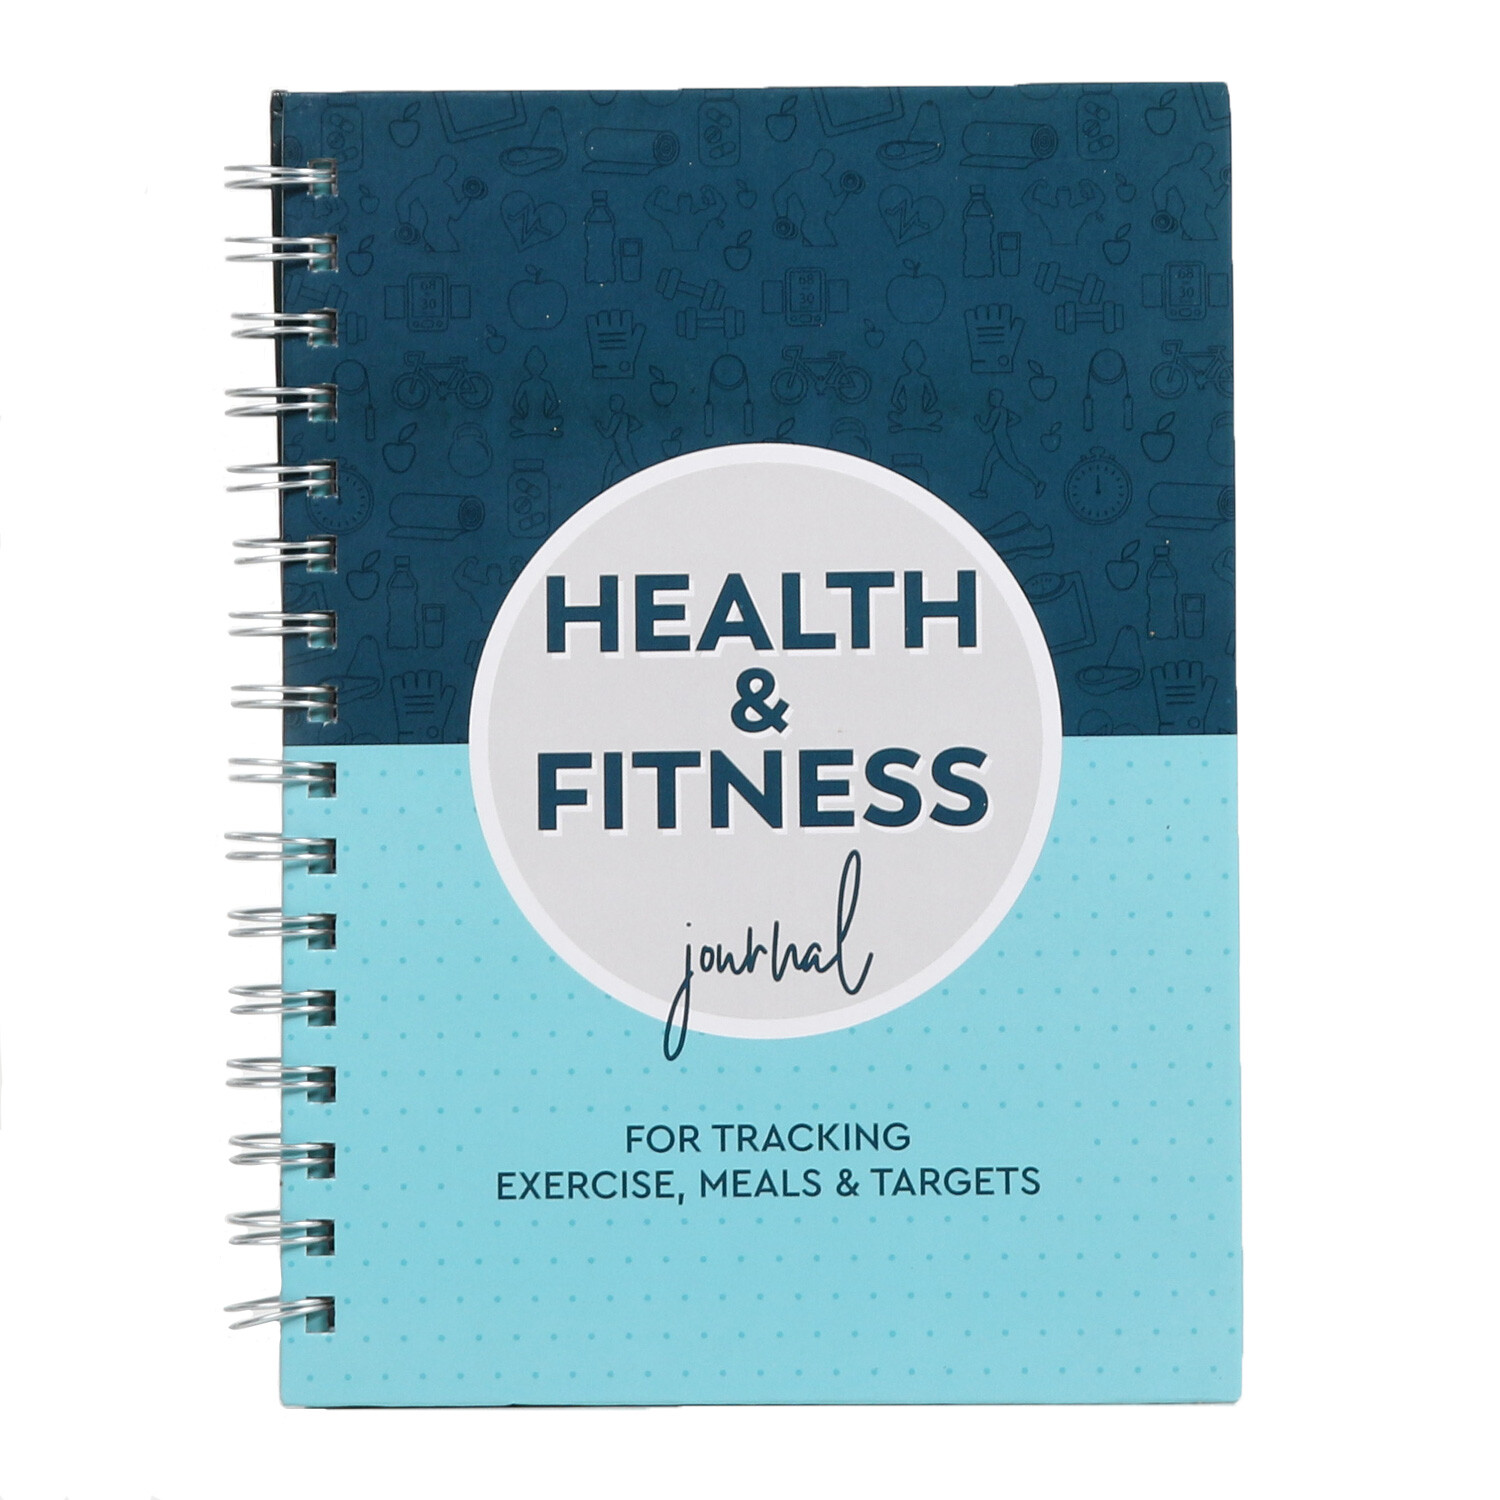 Fitness Journal Image 1